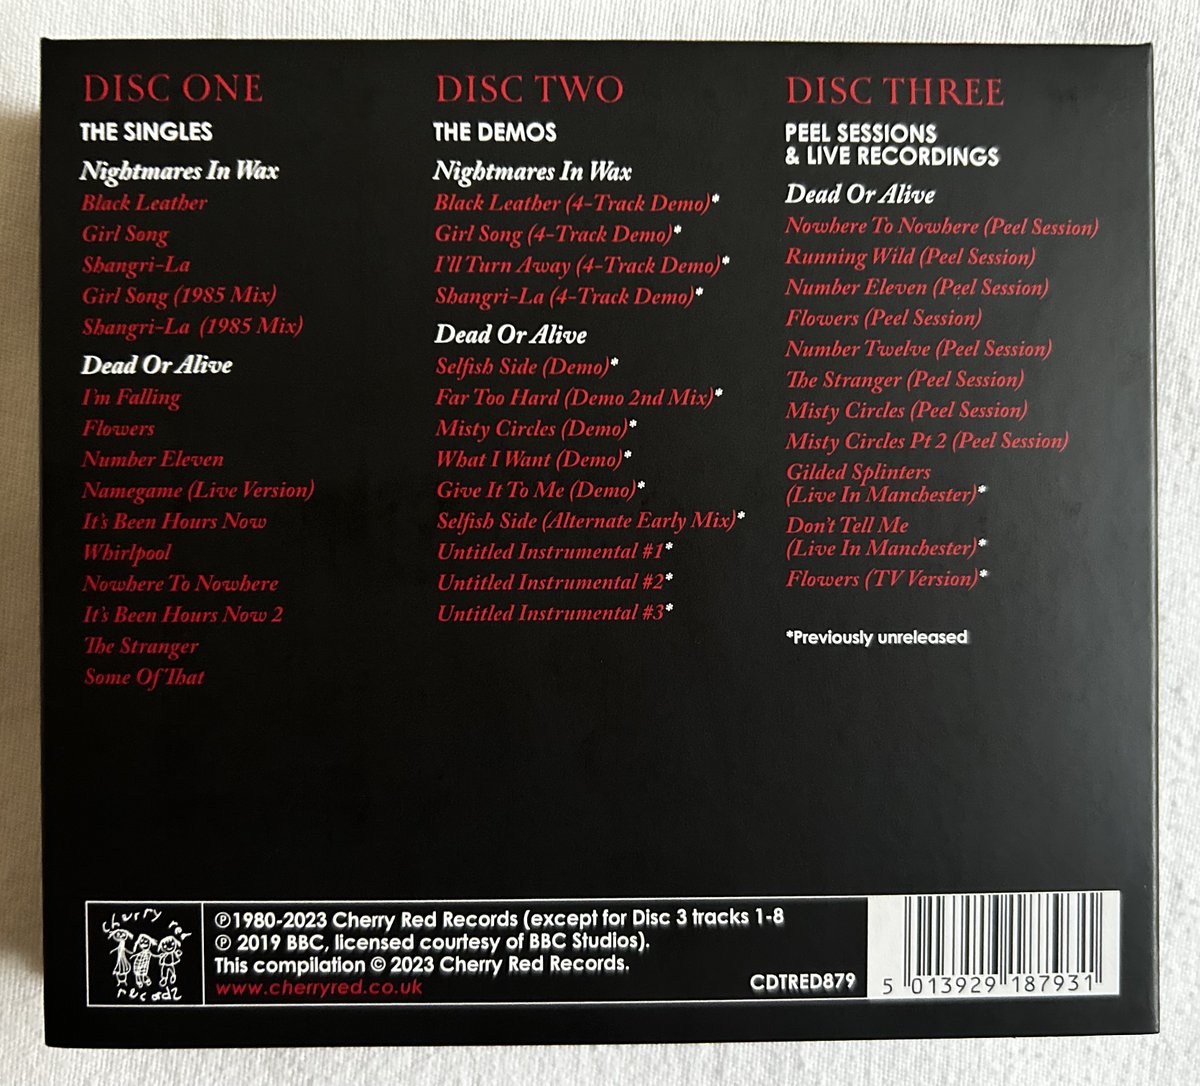 #NowPlaying 
#DeadOrAlive #LetThemDragMySoulAway
🇬🇧 #CD 2023

The demos on CD2 are incredible especially the 9.14 minute #MistyCircles ❤️🖤

#NightmaresInWax
#PeteBurns #MartinHealy #WayneHussey
#SteveCoy #MikePercy #TimLever